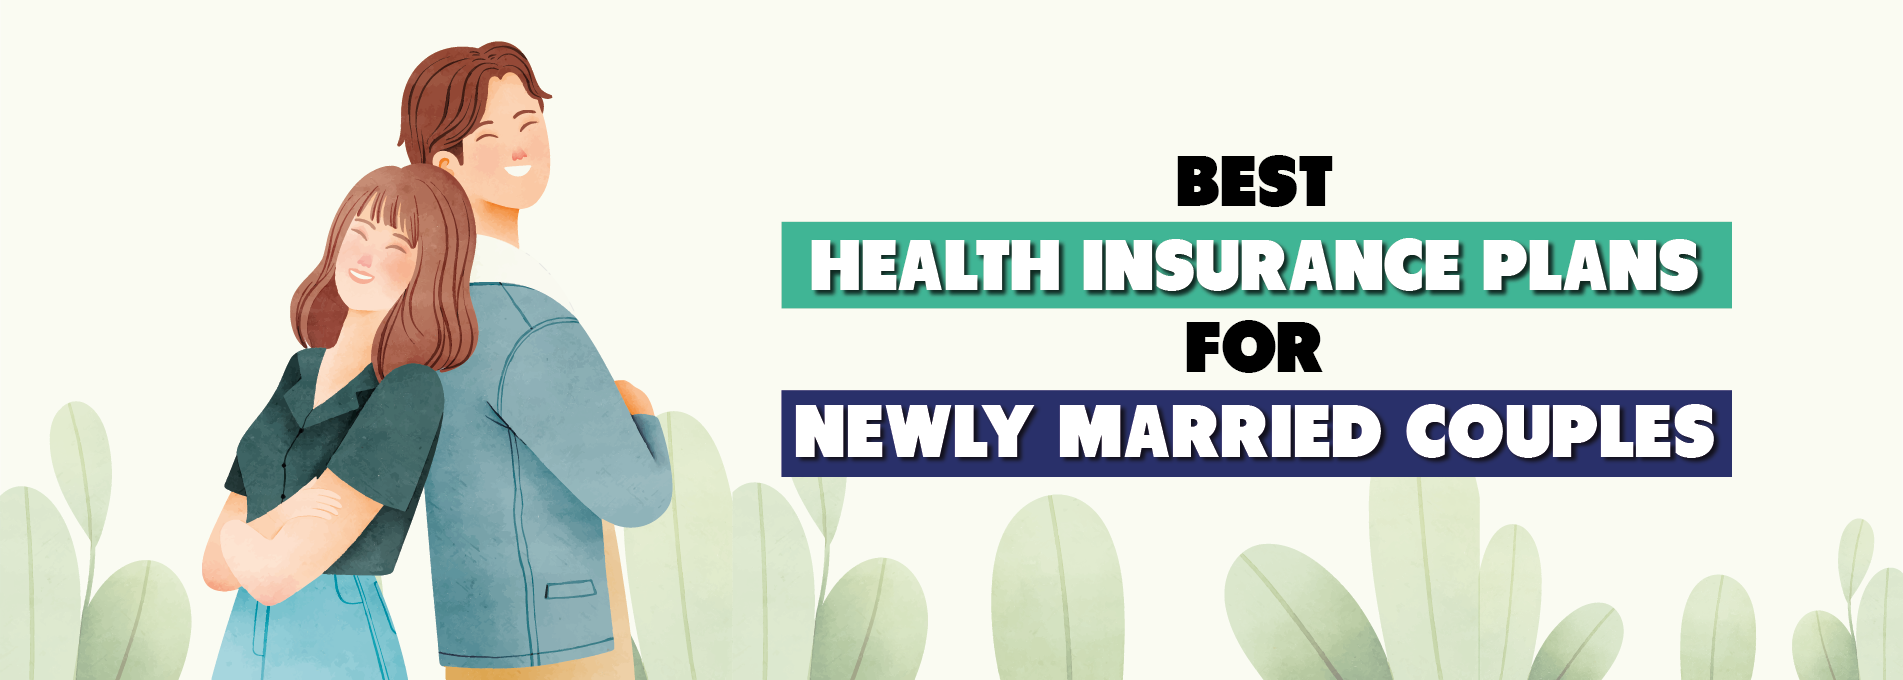 Best Health insurance Plans for Newly Married Couples